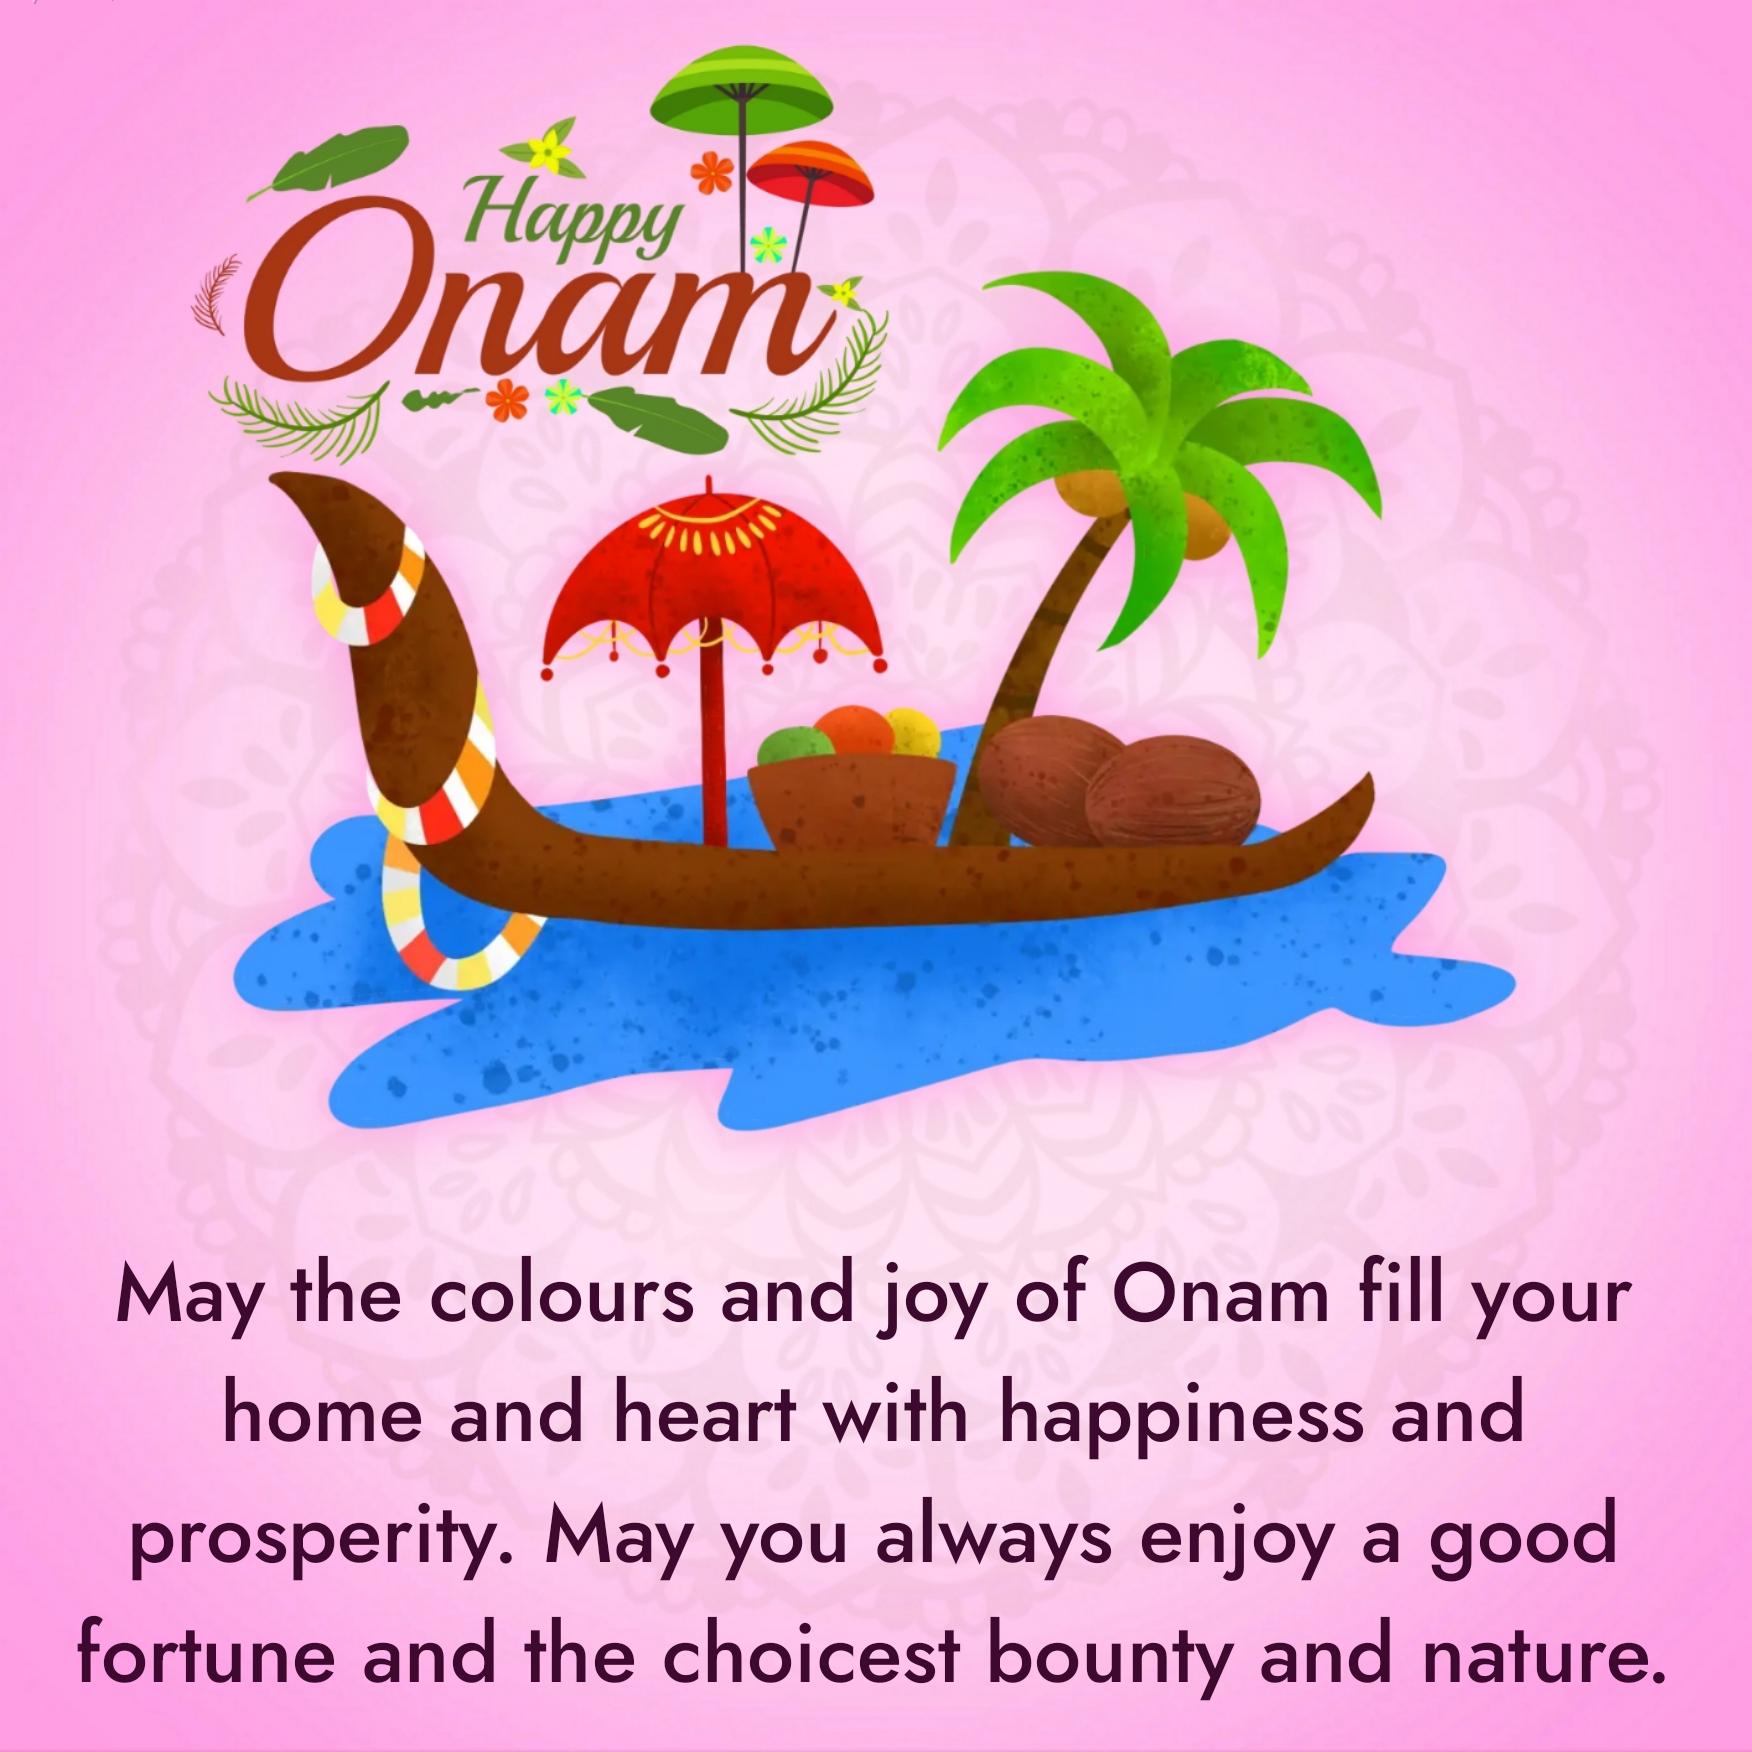 May the colours and joy of Onam fill your home and heart